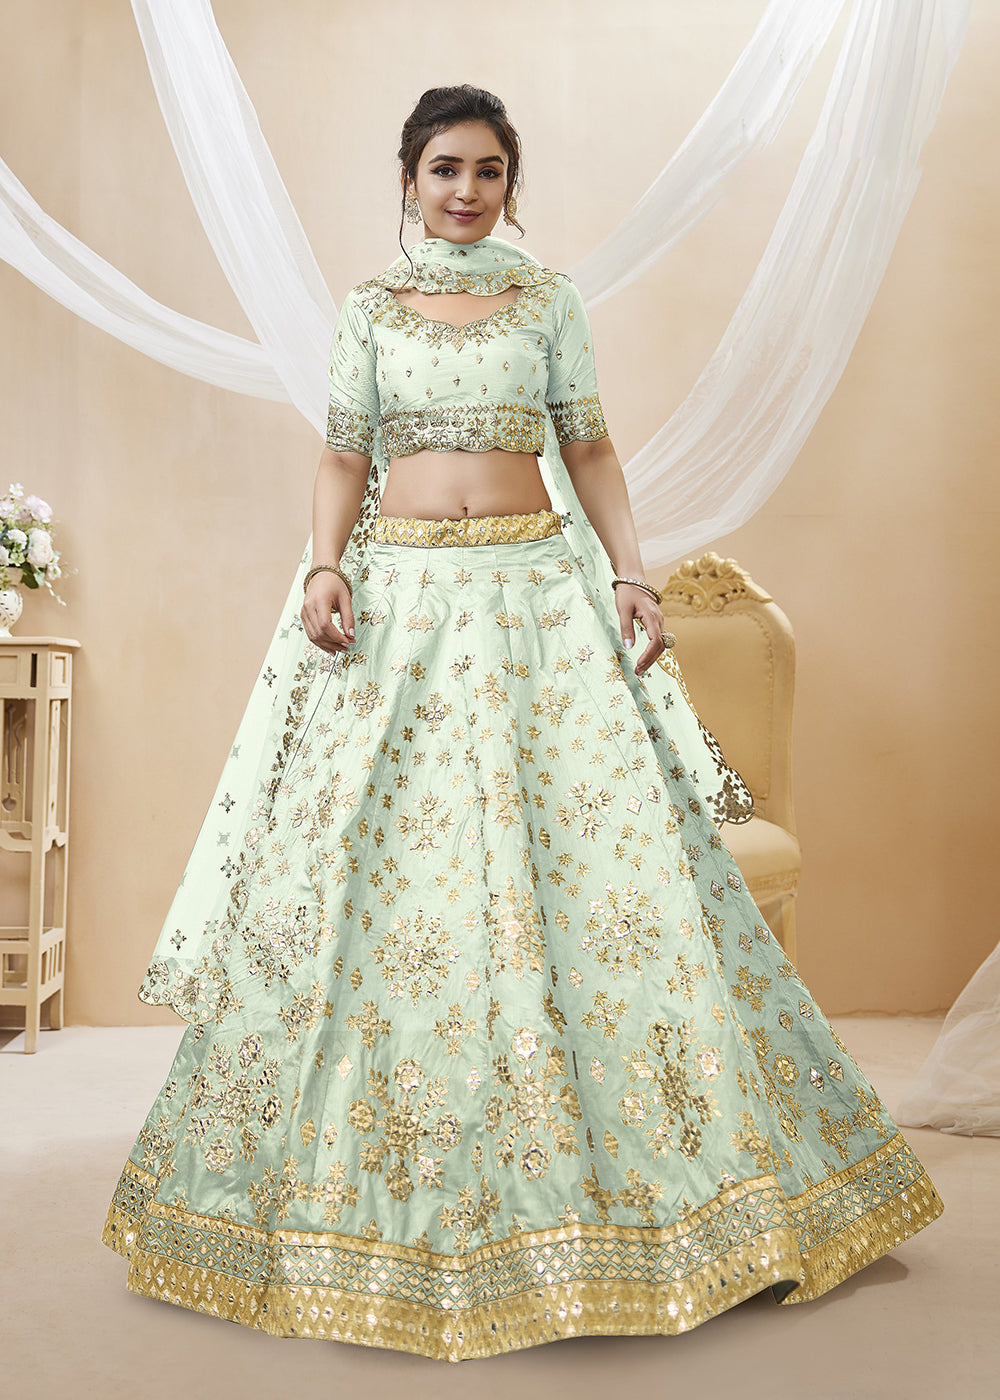 Buy Now Pistachio Green Art Silk Embroidered Reception Wear Lehenga Choli Online in USA, UK, Canada & Worldwide at Empress Clothing.